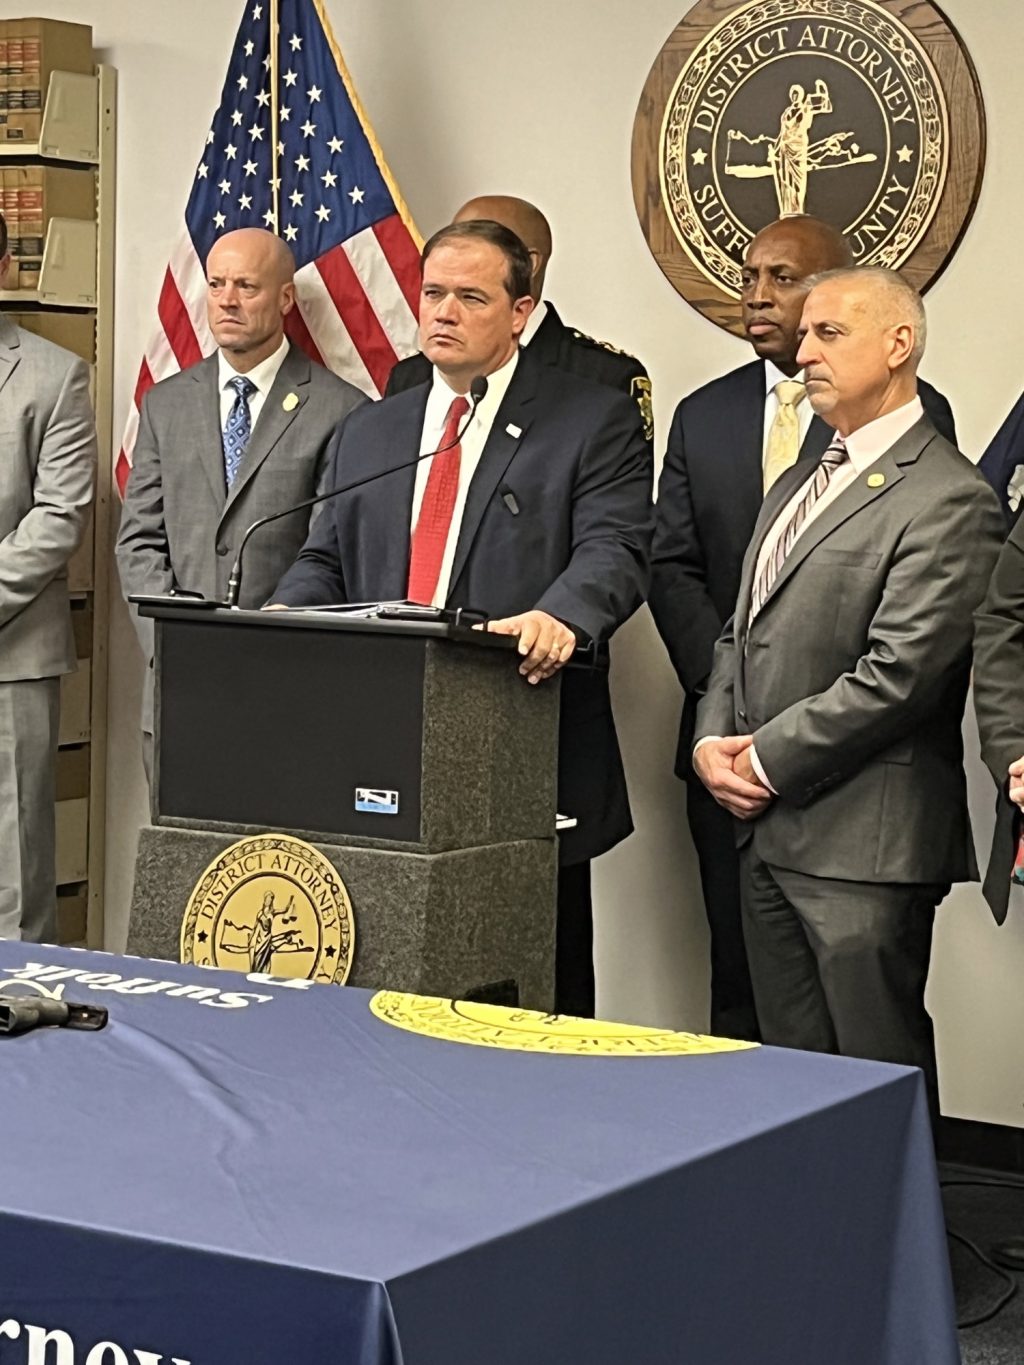 Photo by Shannon Wilson/Office of Suffolk County District Attorney Ray Tierney
Suffolk County District Attorney Ray Tierney (standing behind podium) takes questions during a press conference on December 12 announcing the indictment of 18 alleged gang members.